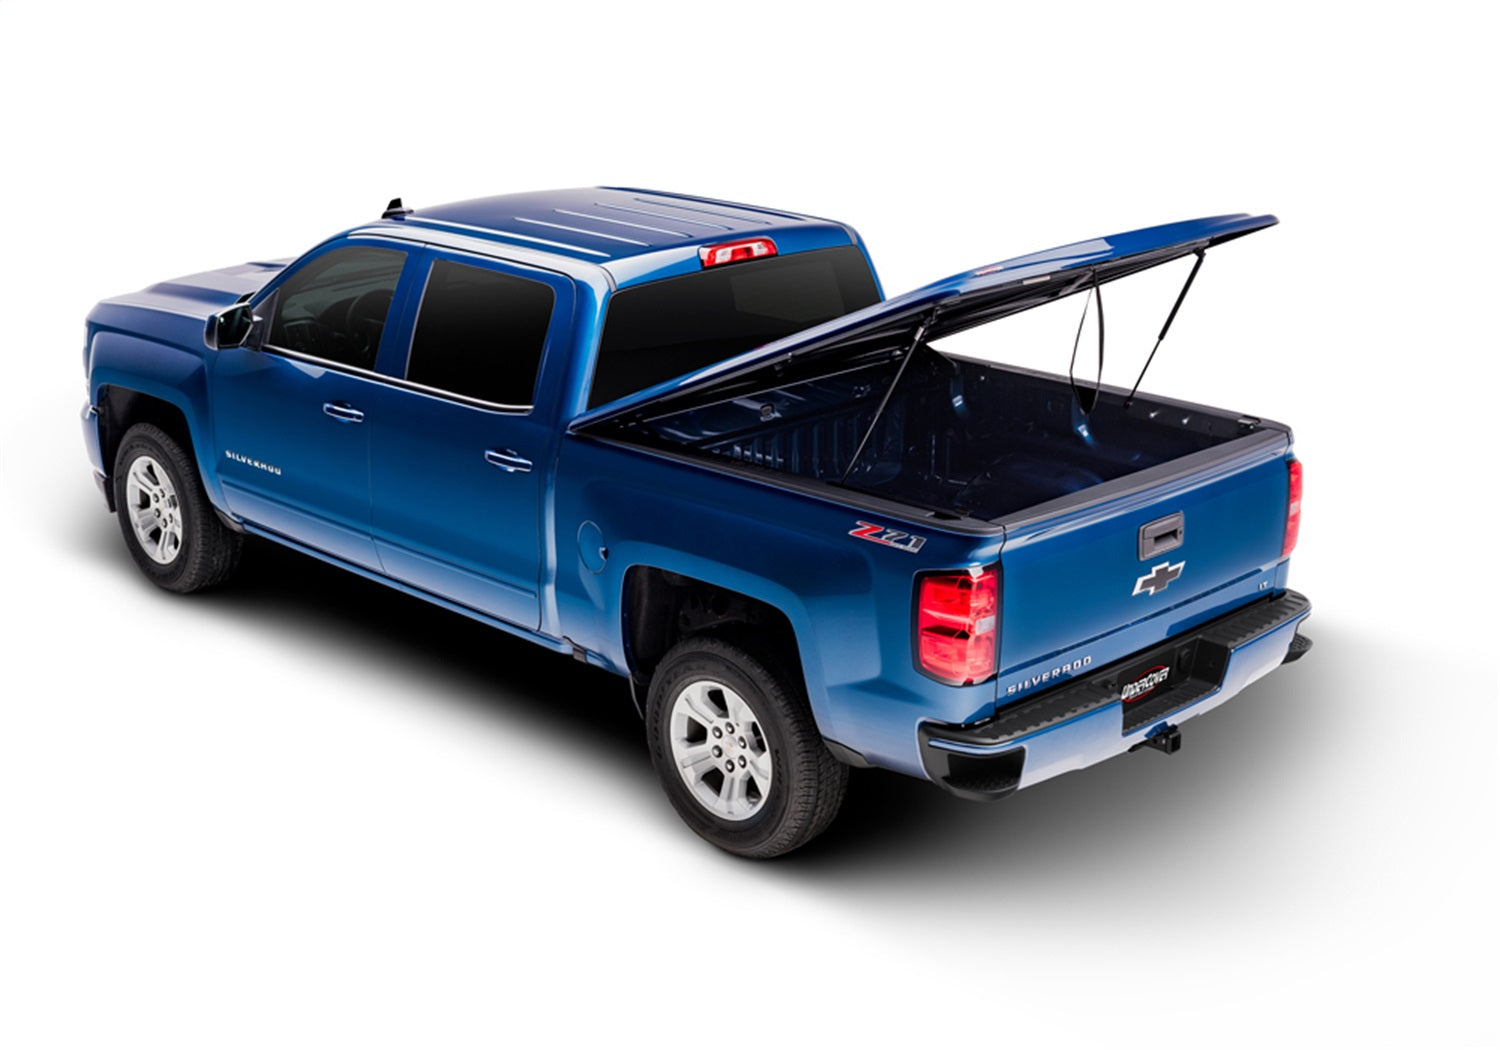 UnderCover UC1146S SE Smooth Tonneau Cover